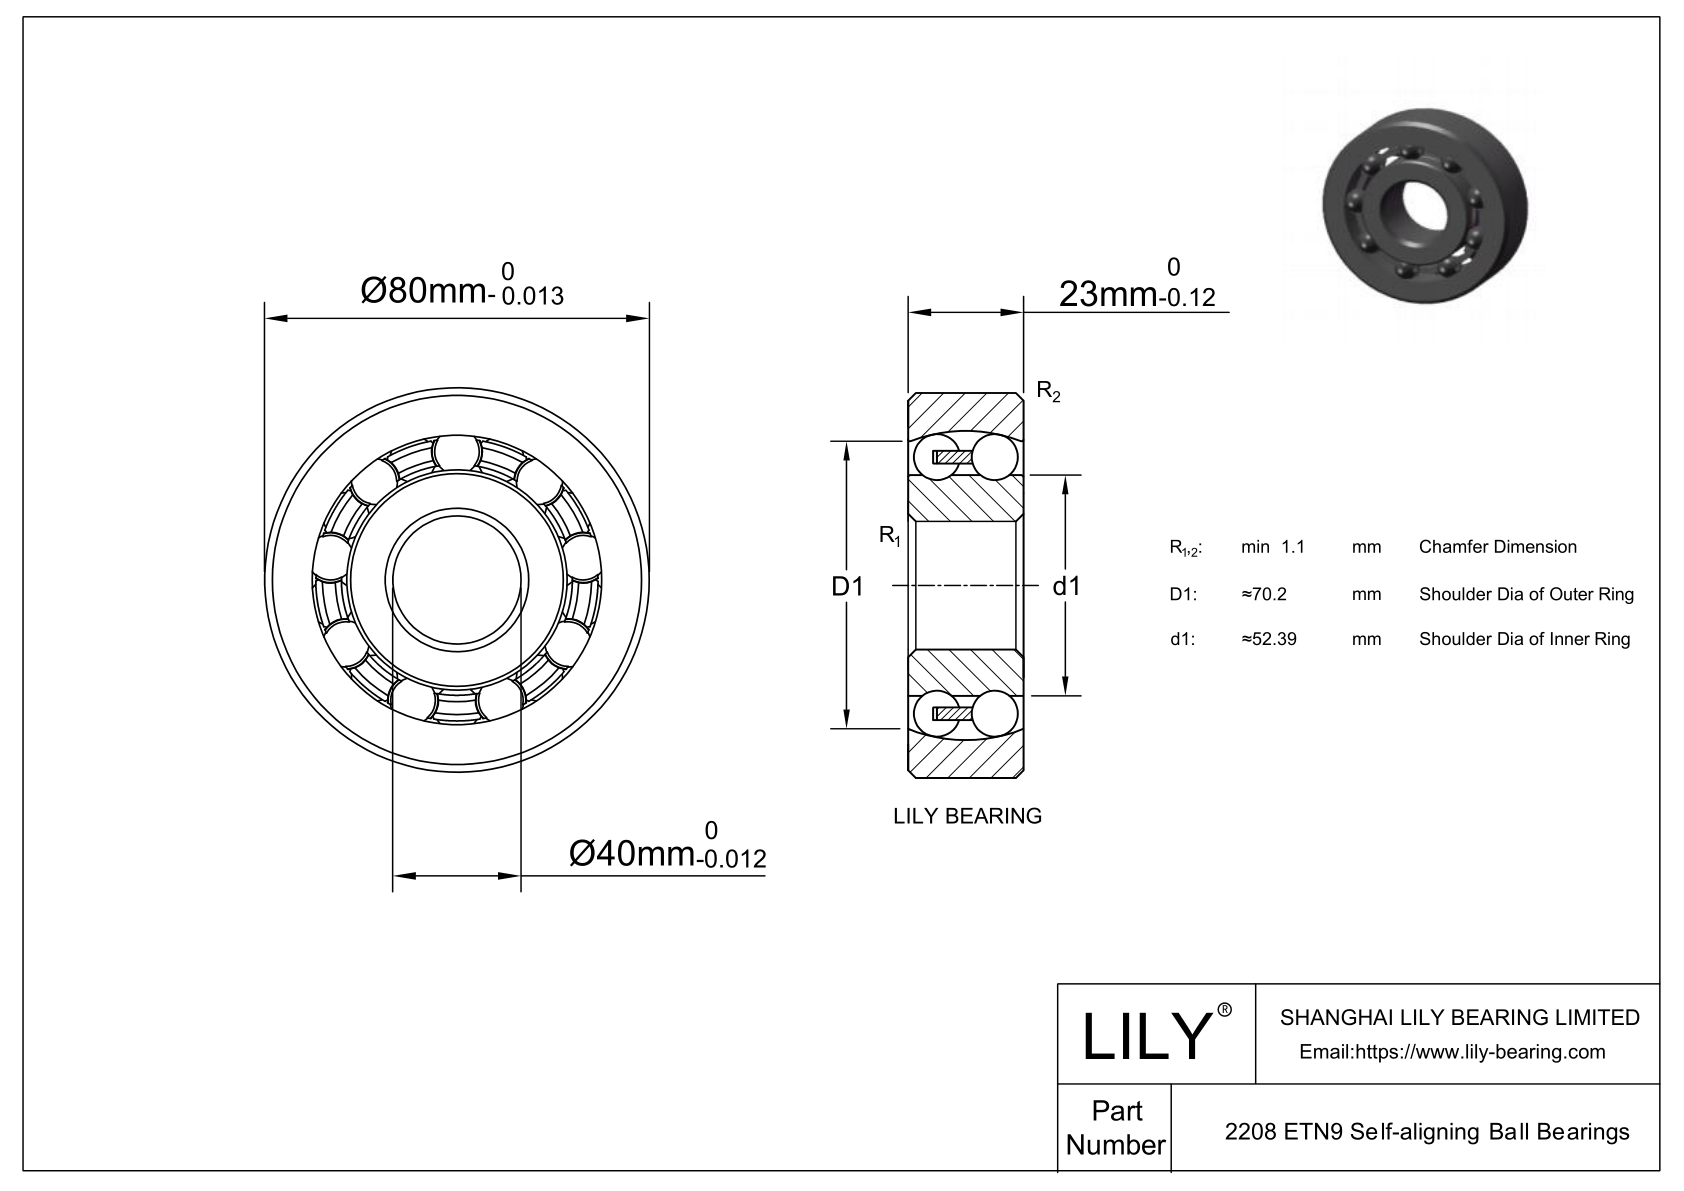 S2208 ETN9 Stainless Steel Self Aligning Ball Bearings cad drawing